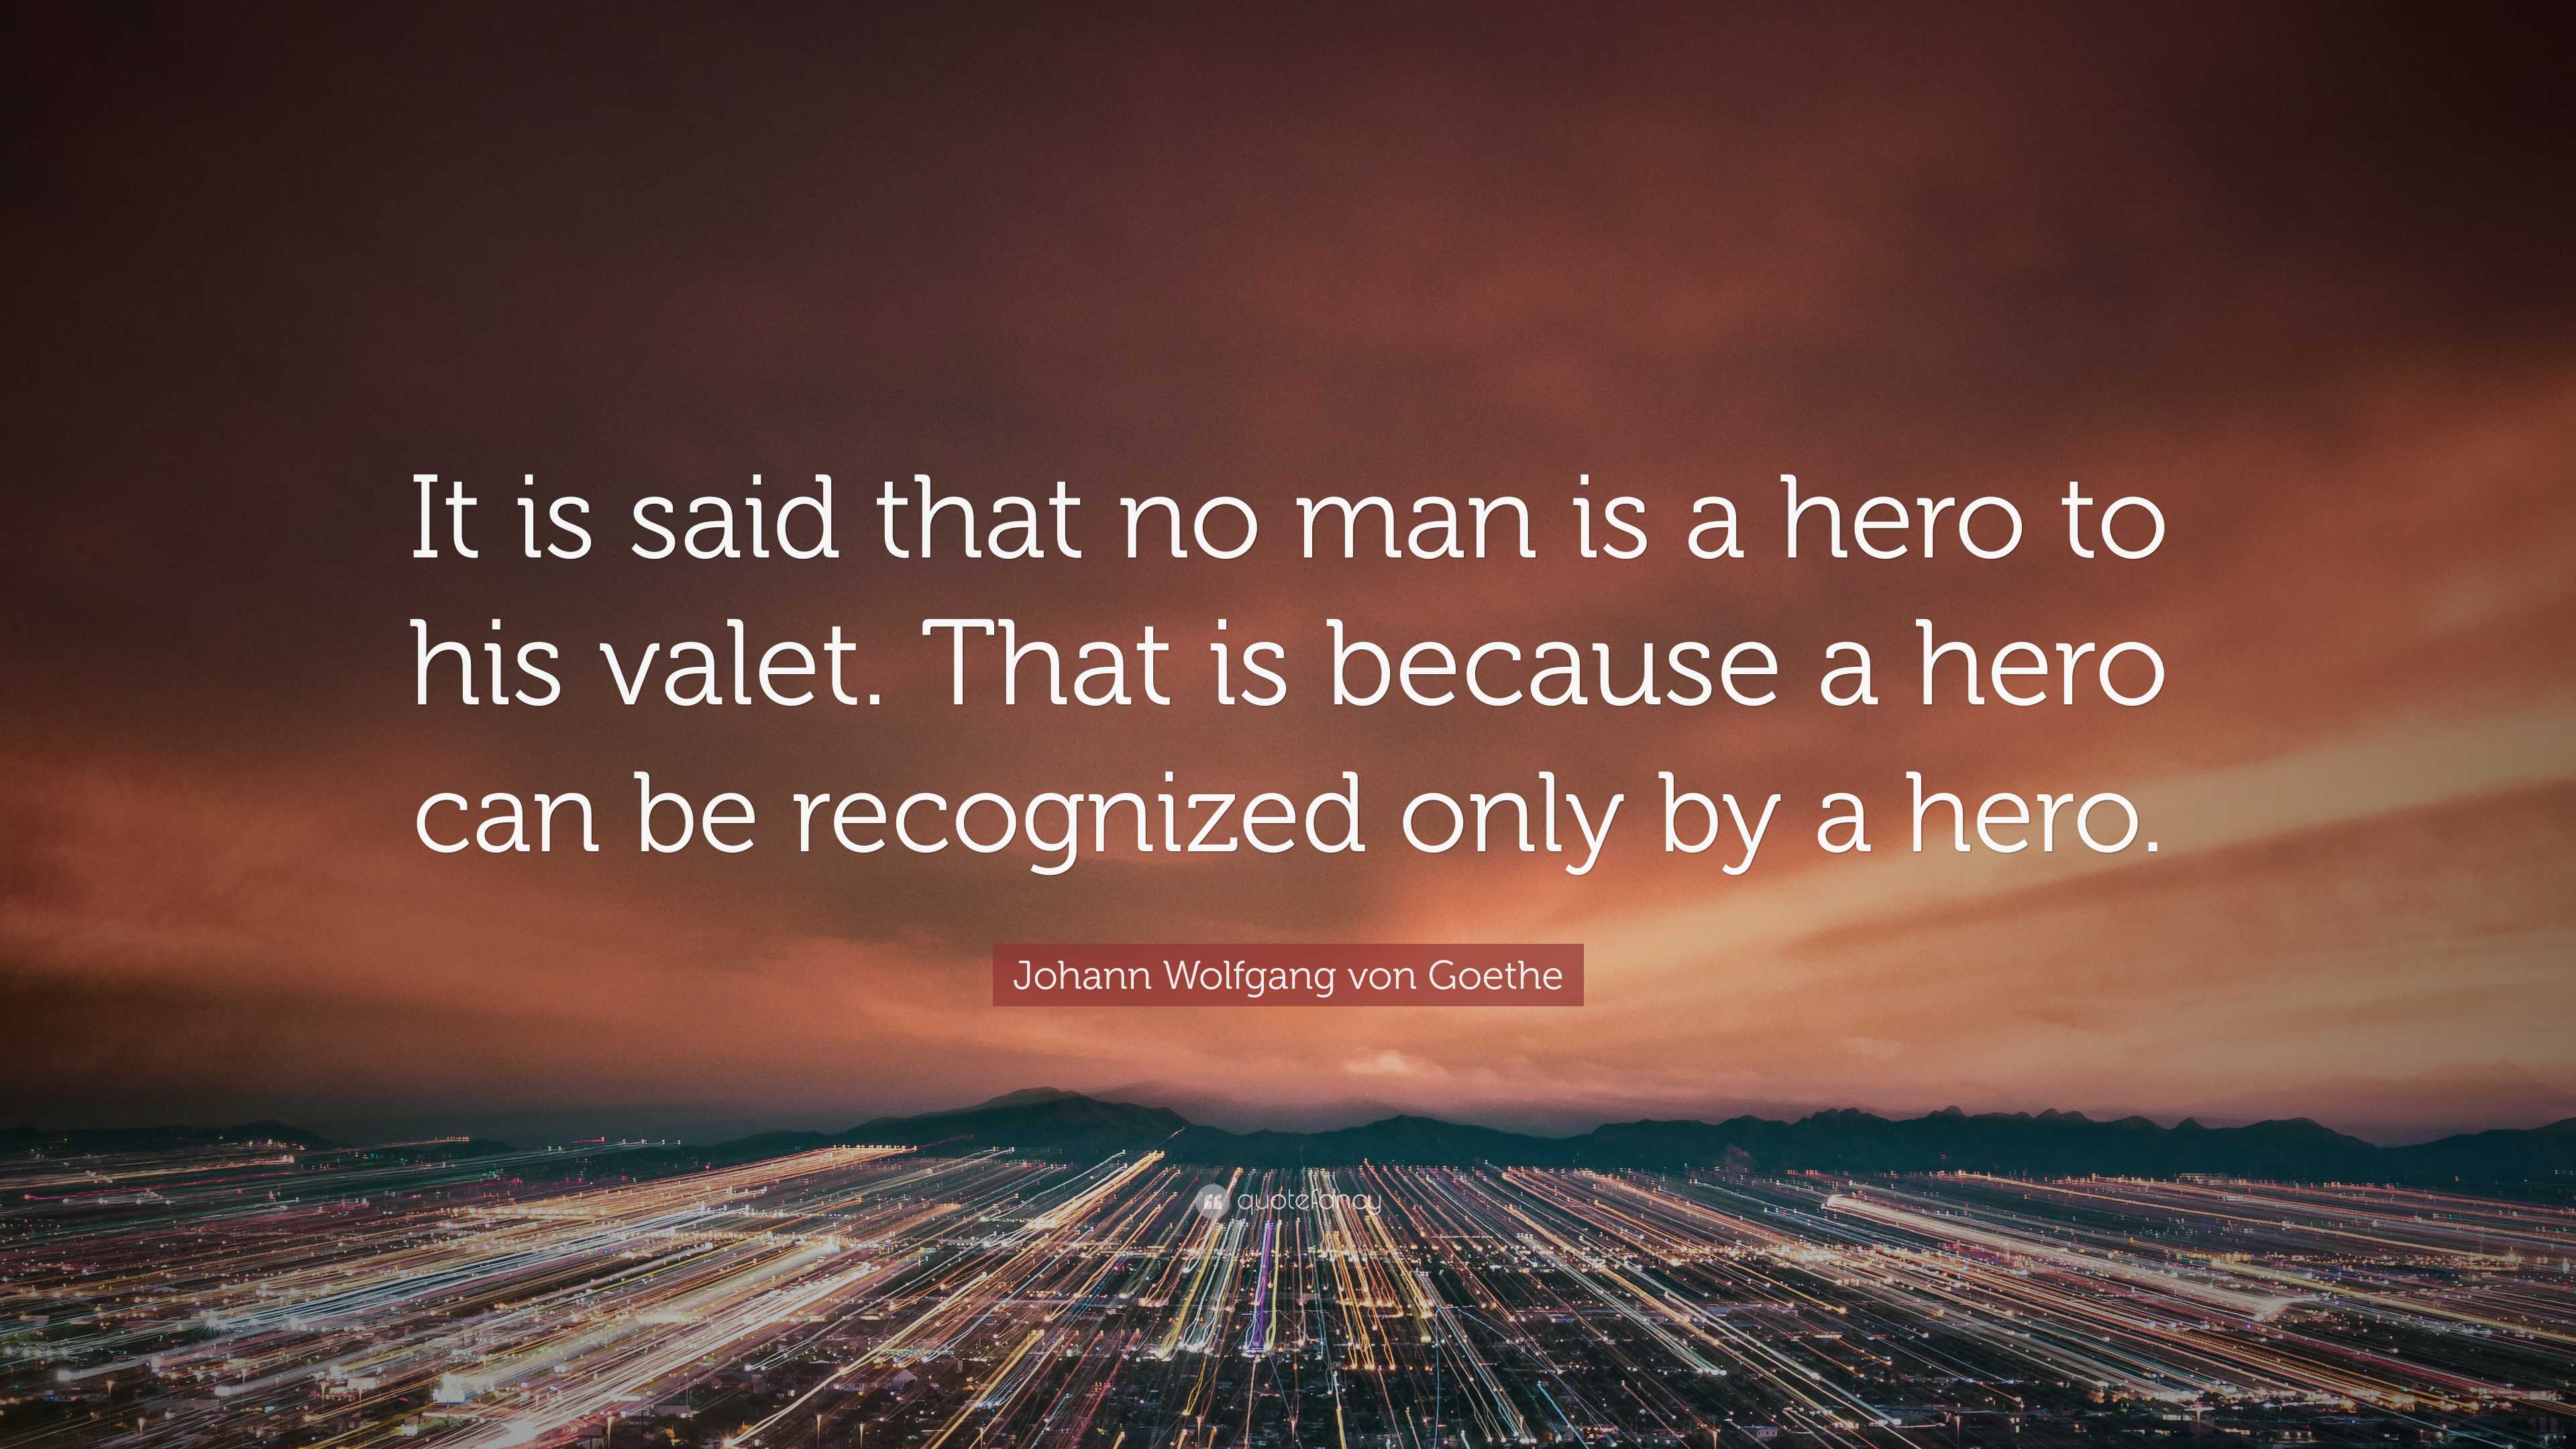 Johann Wolfgang von Goethe Quote: “It is said that no man is a hero to ...